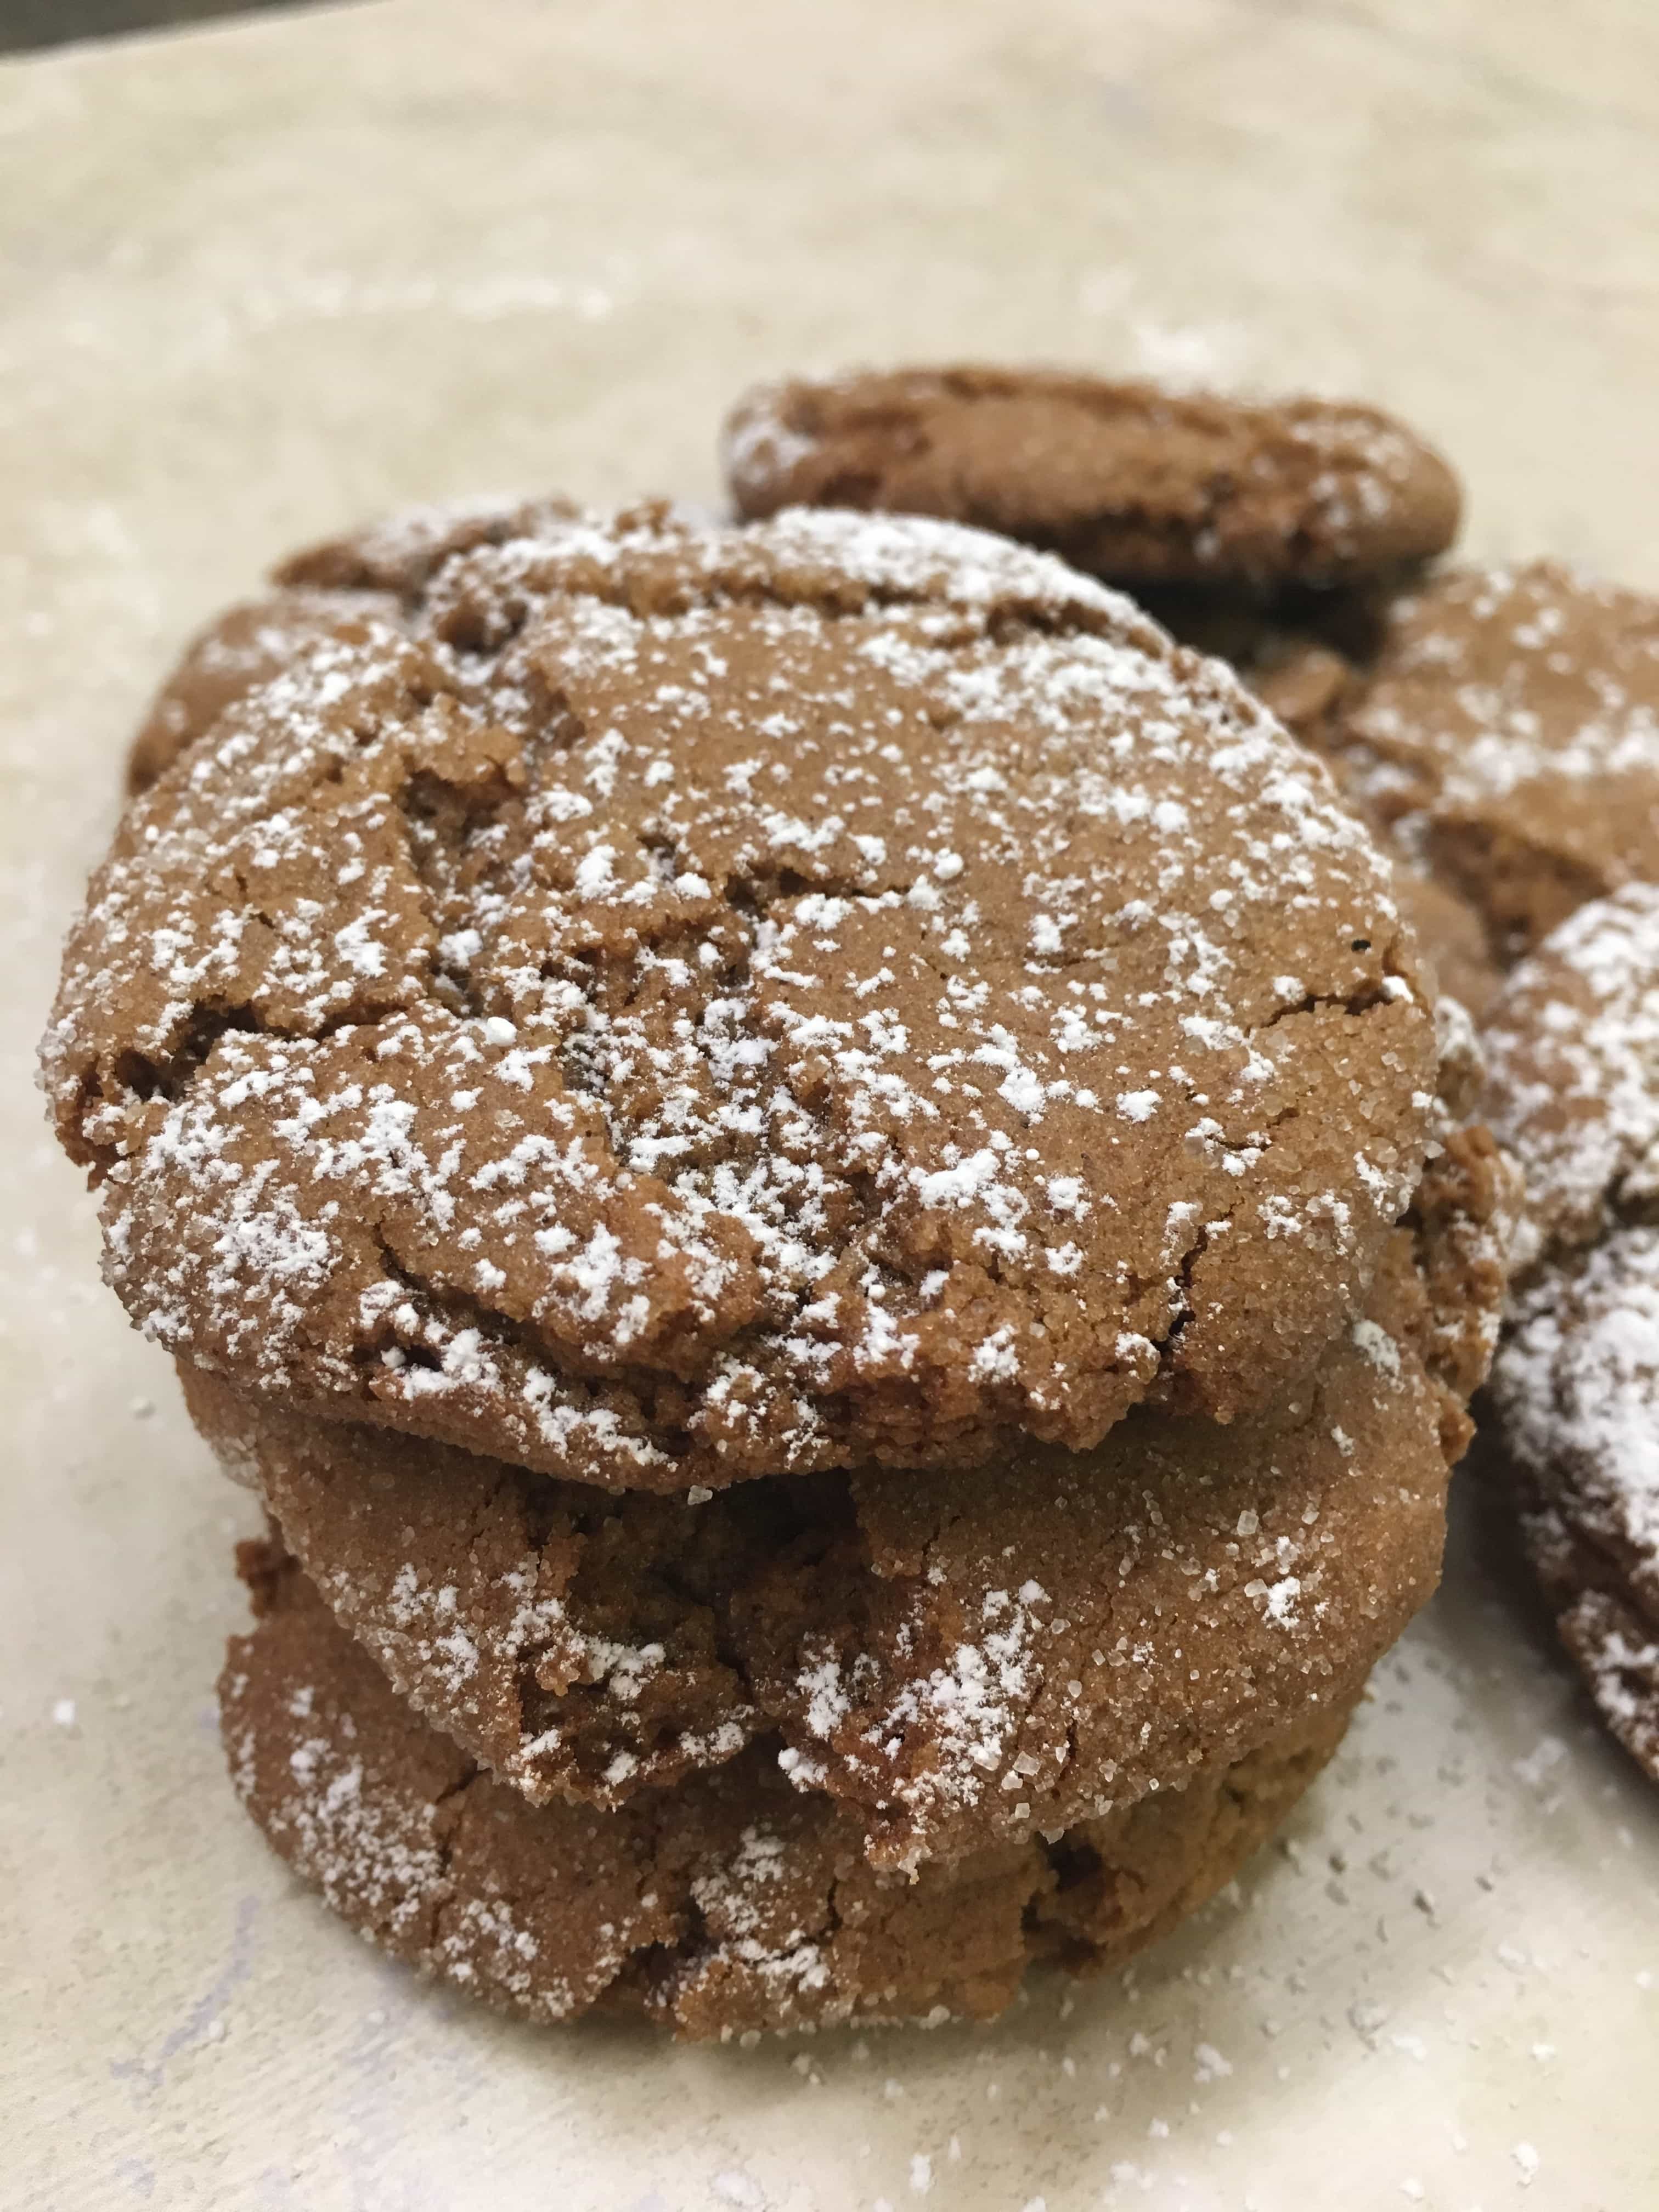 How to Make Molasses Gingersnap Cookies. This is an easy recipe that will make great gifts for friends and family around Christmas or any holiday.